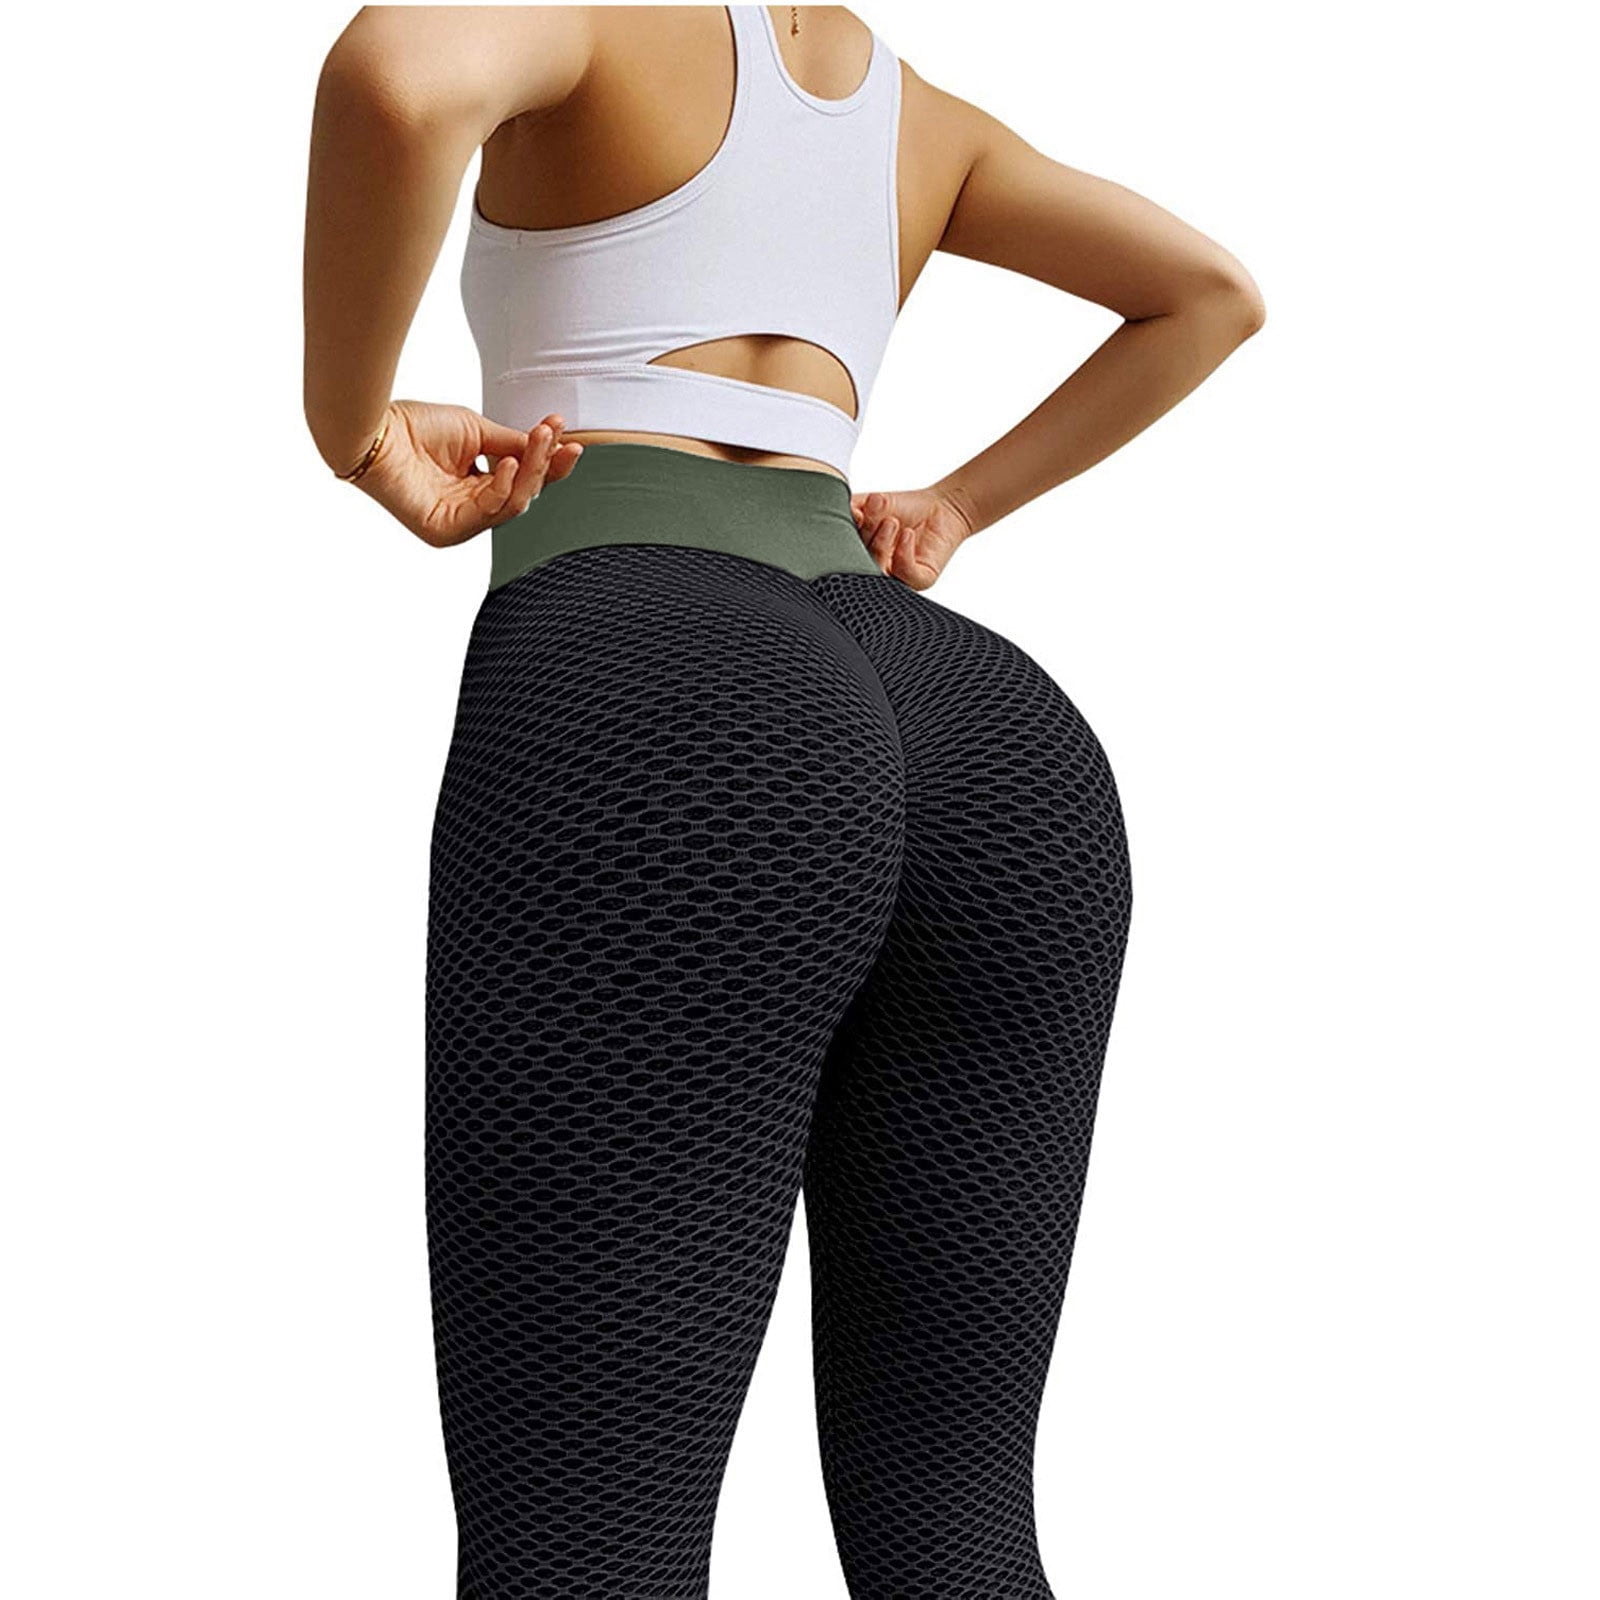 HAPIMO Sales Women's Yoga Pants High Waist Tummy Control Workout Pants Hip  Lift Tights Stretch Athletic Slimming Running Yoga Leggings for Women Black  L 